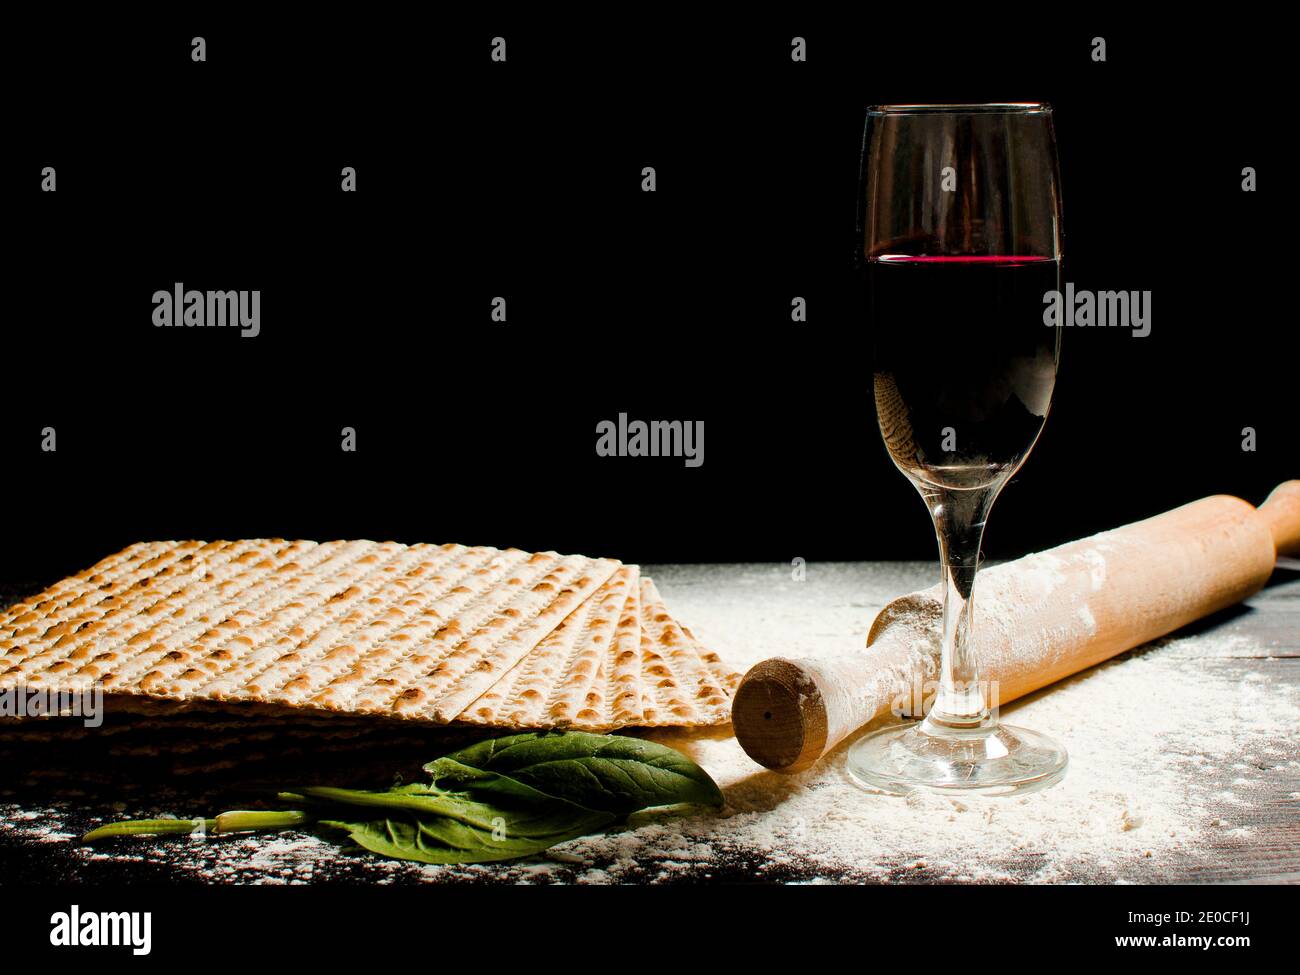 traditional Jewish kosher matzo for Easter pesah on a wooden table. Jewish Easter food. Spring. Family holiday Pesach. Stock Photo